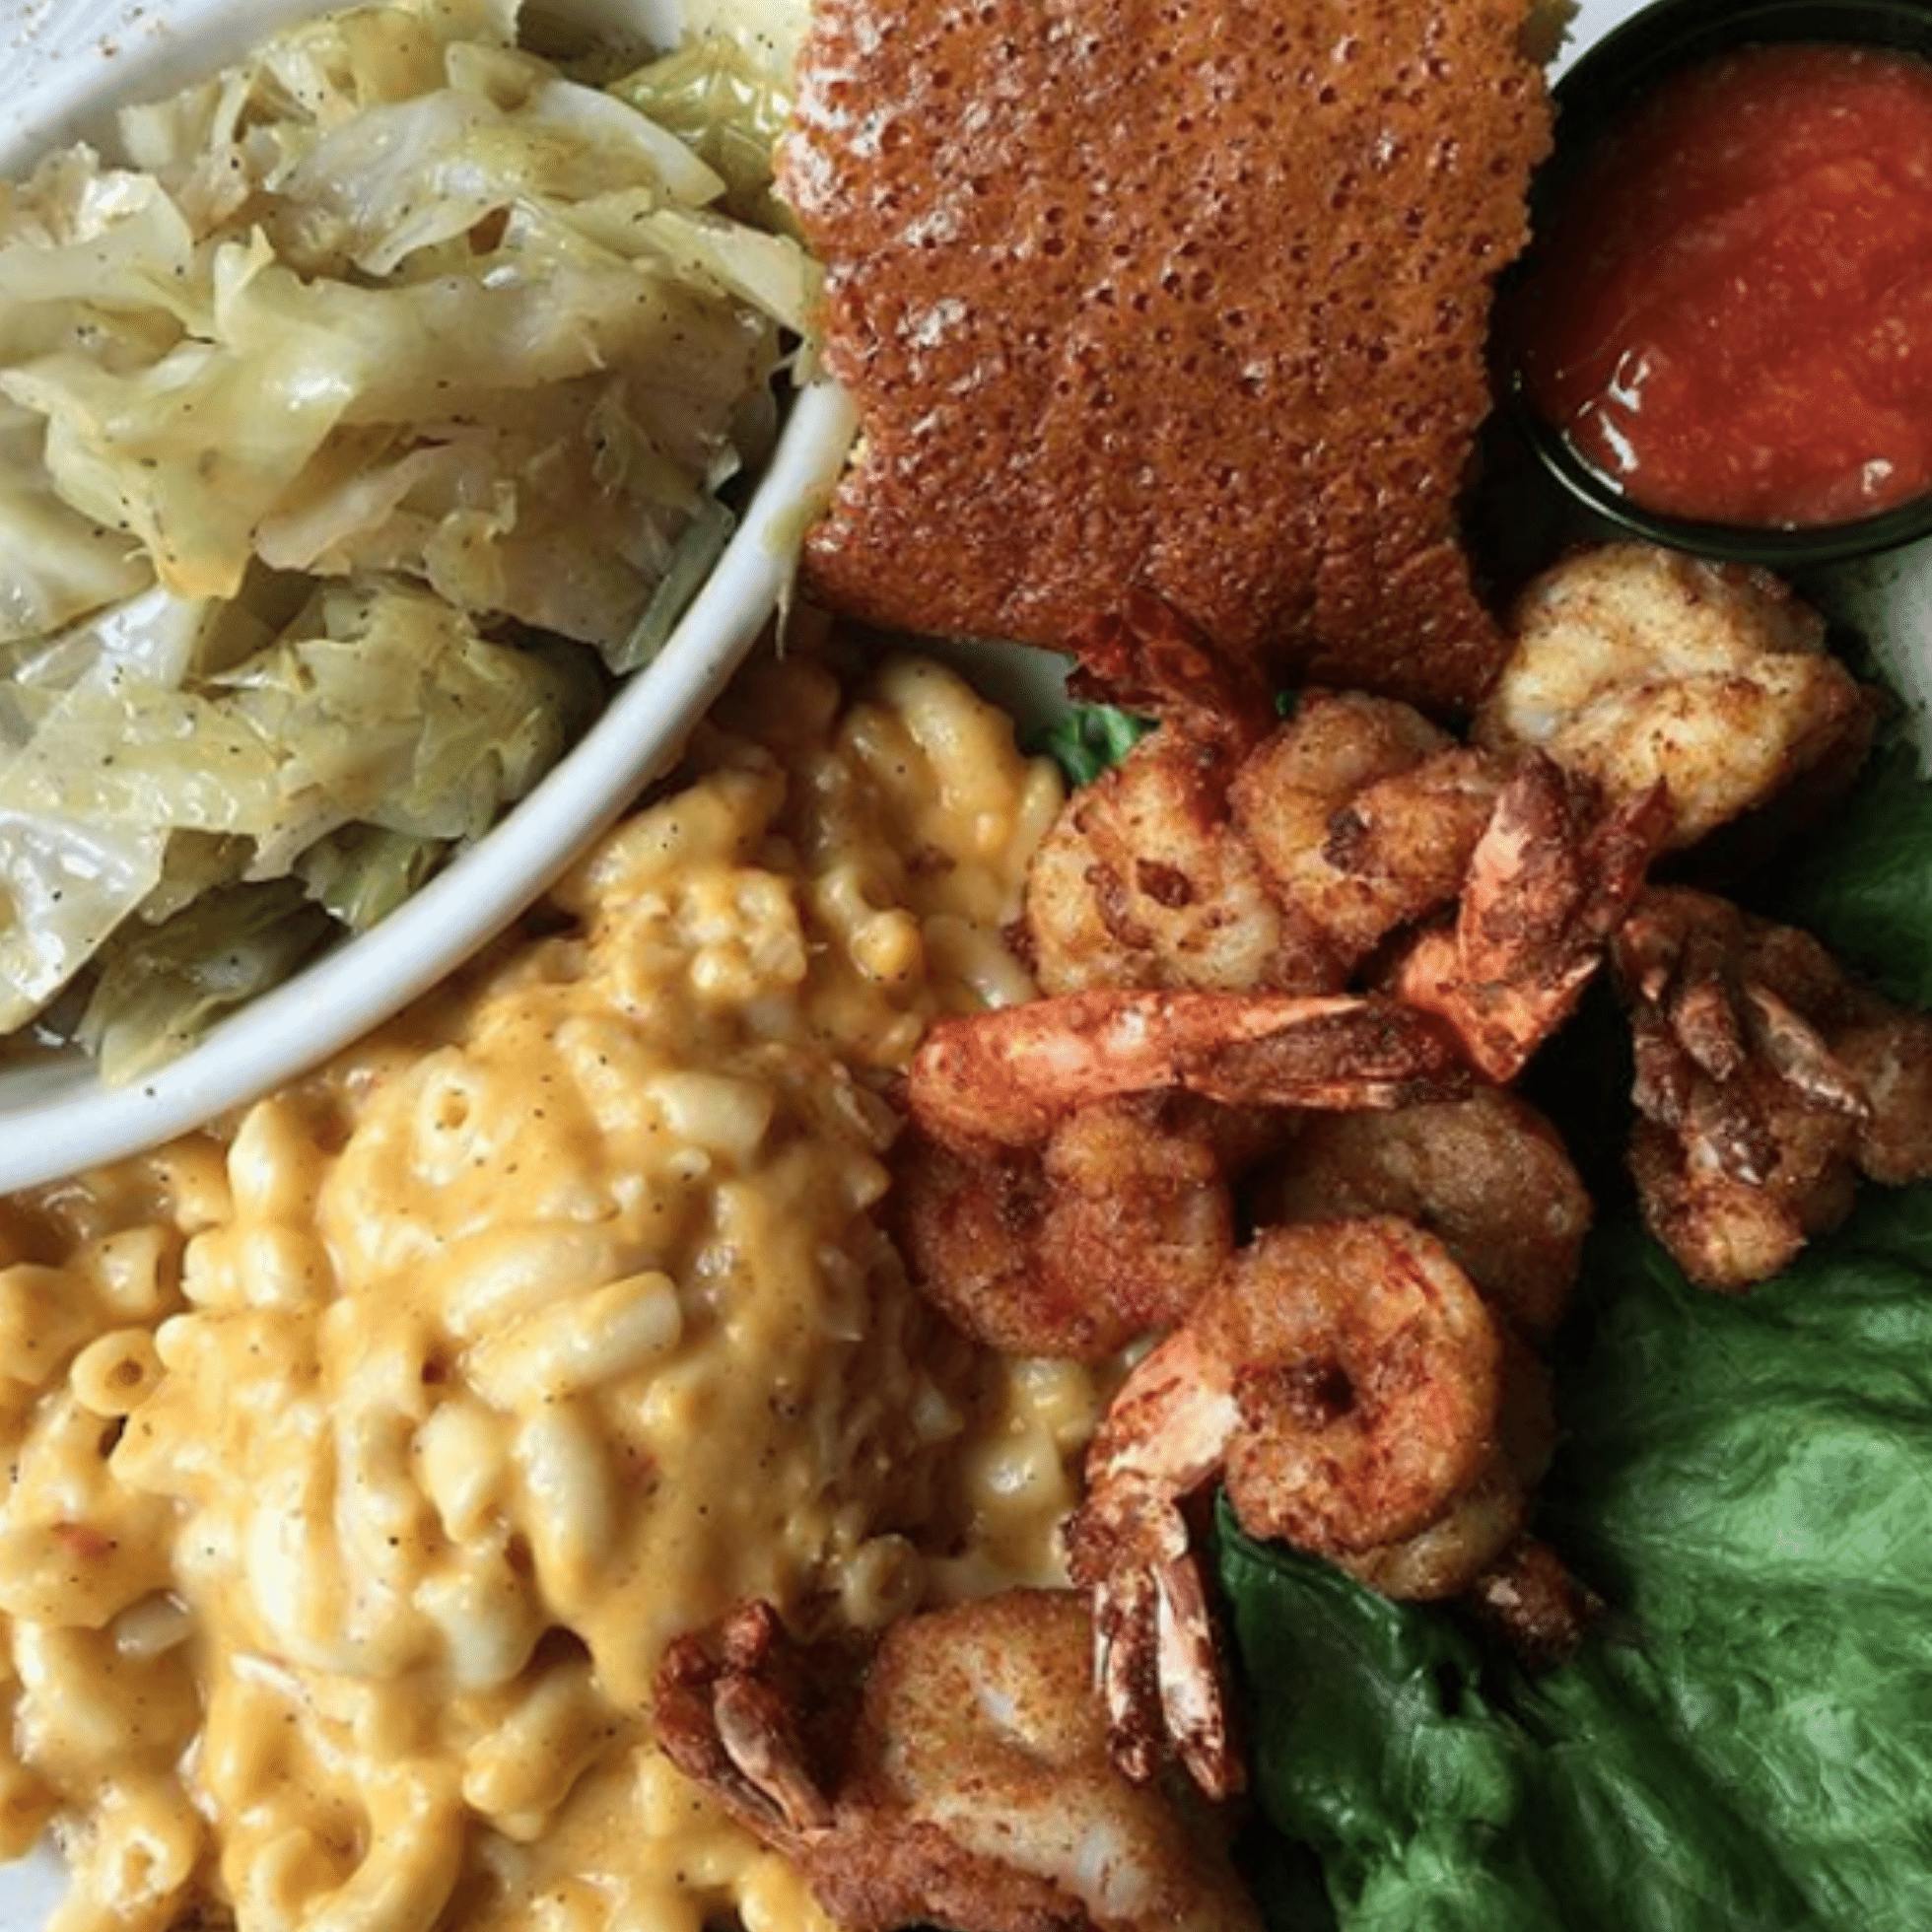 Cabbage, Cornbread, Shrimp, and mac and cheese from Croaker's Spot in Richmond VA